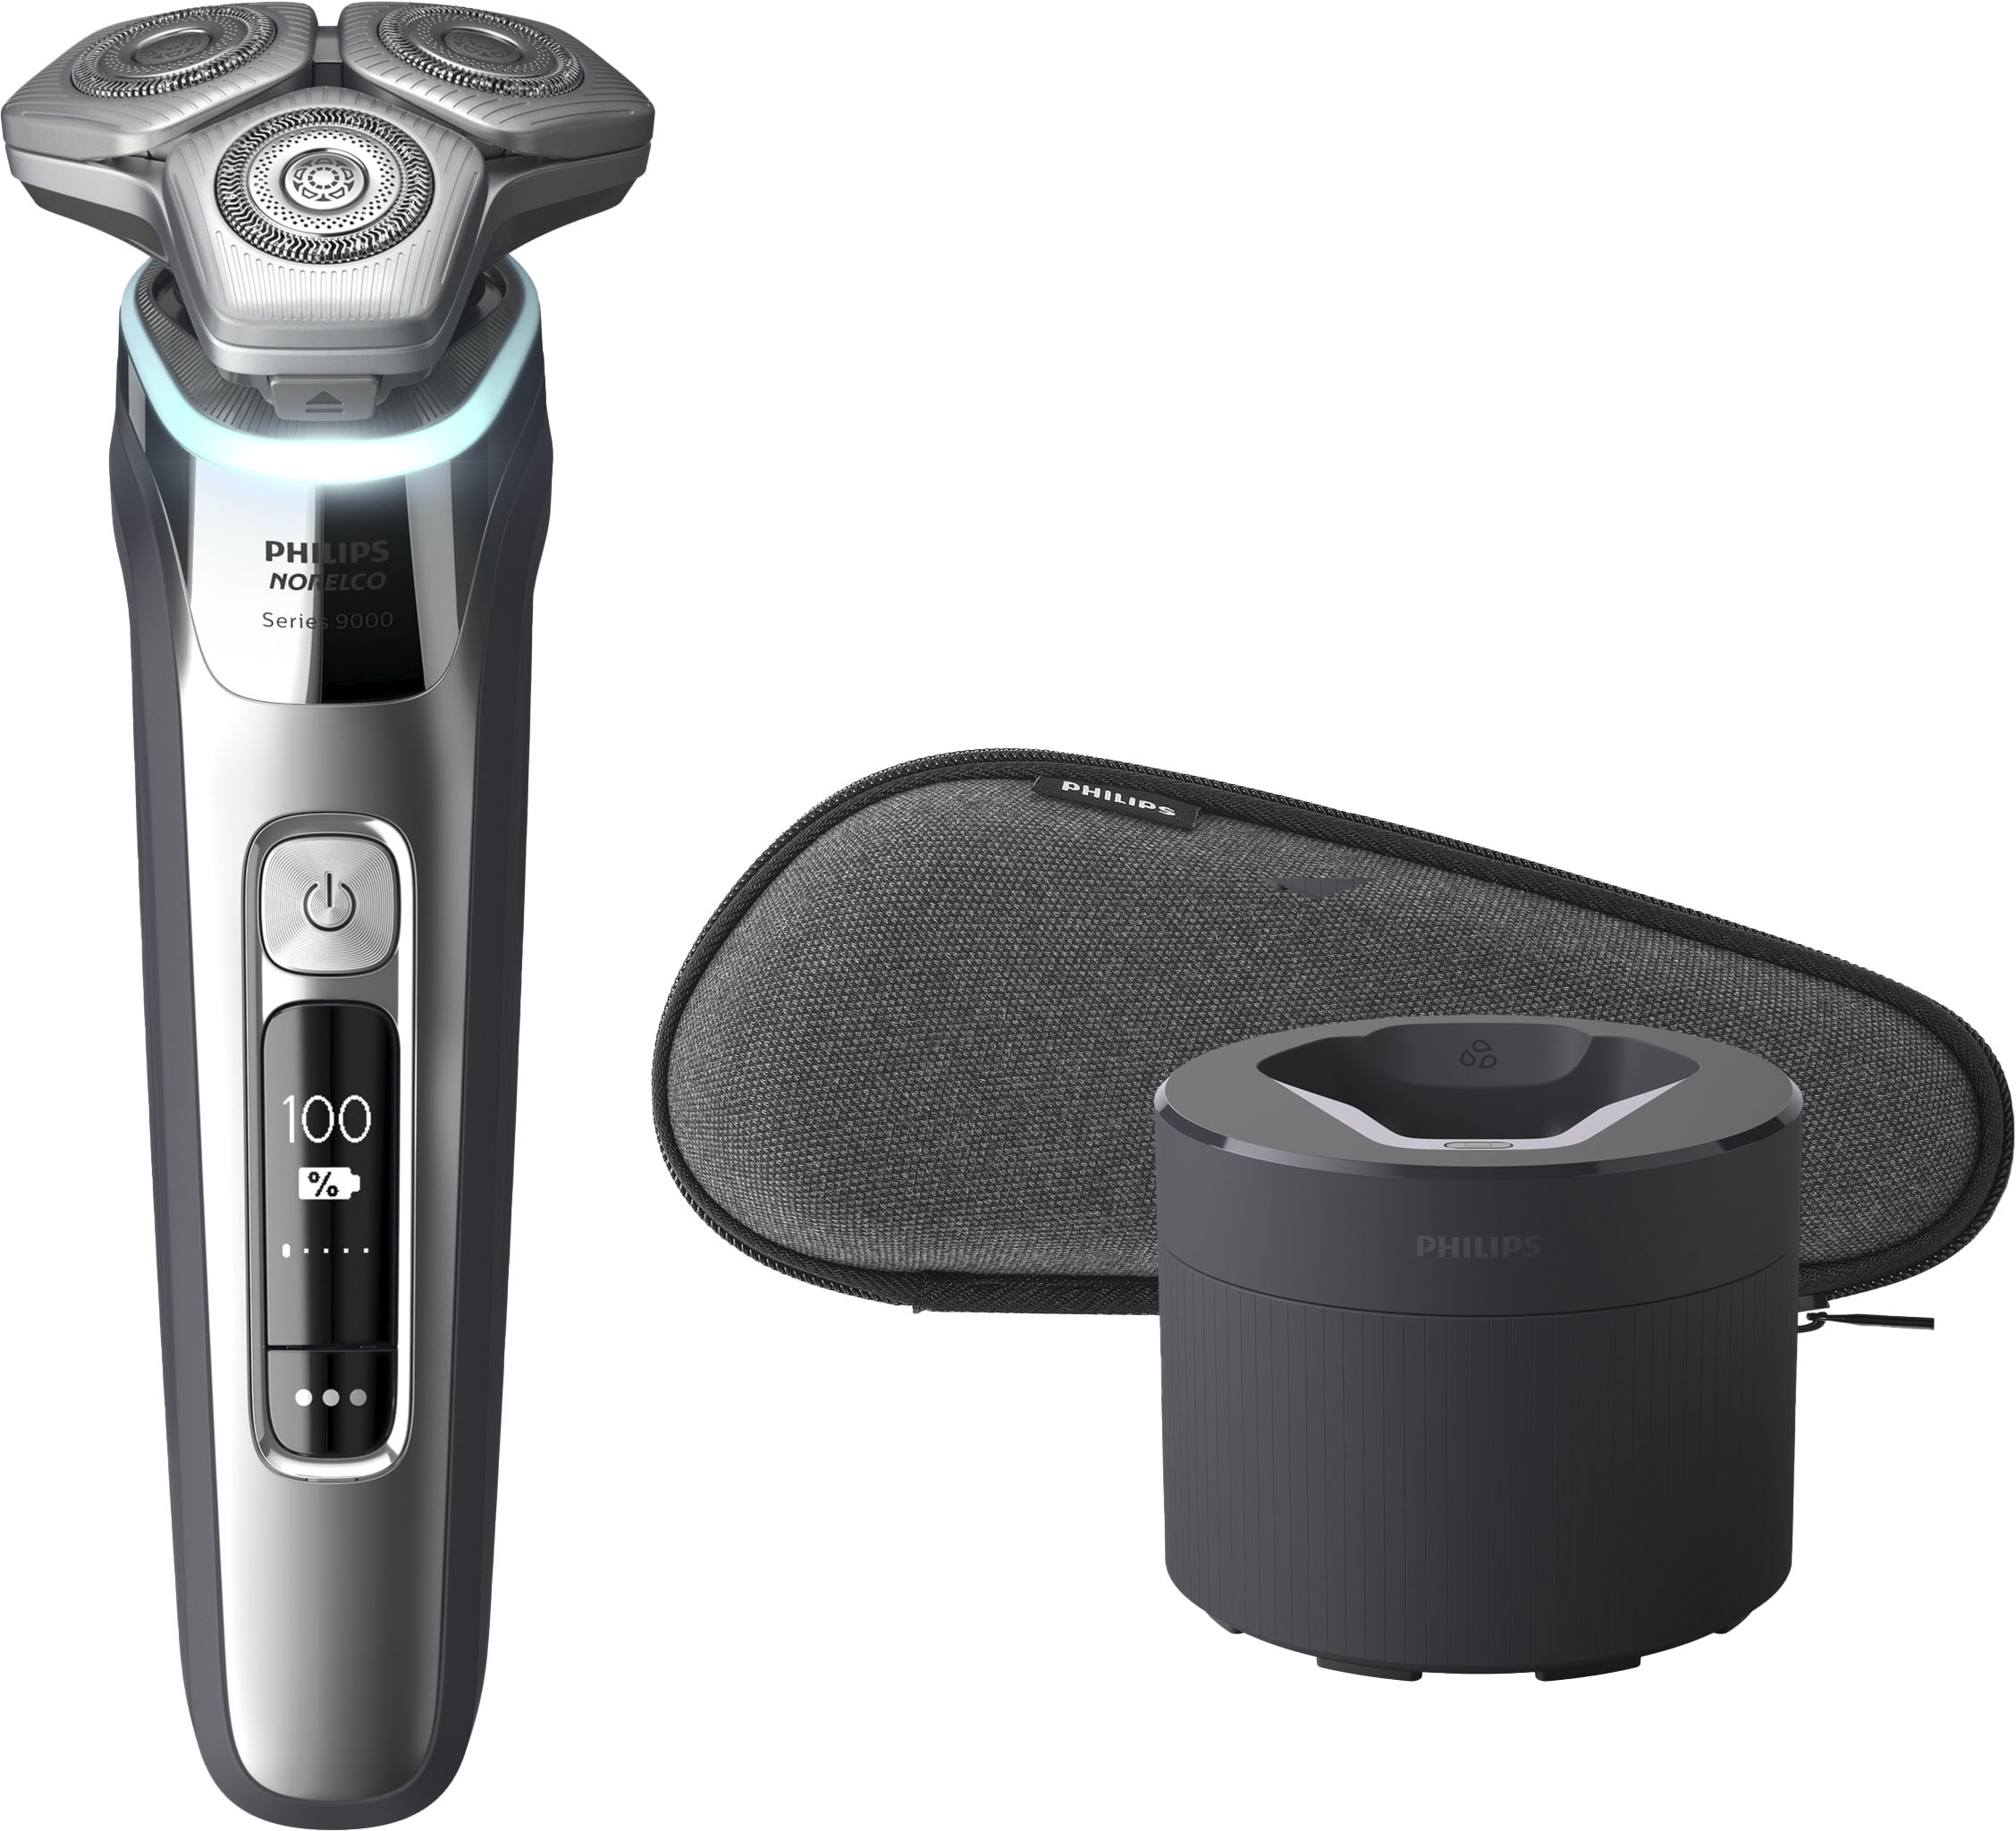 Philips Norelco 9500 Rechargeable Wet/Dry Electric Shaver Quick Clean, Travel Case, and up Trimmer Silver S9985/84 - Best Buy